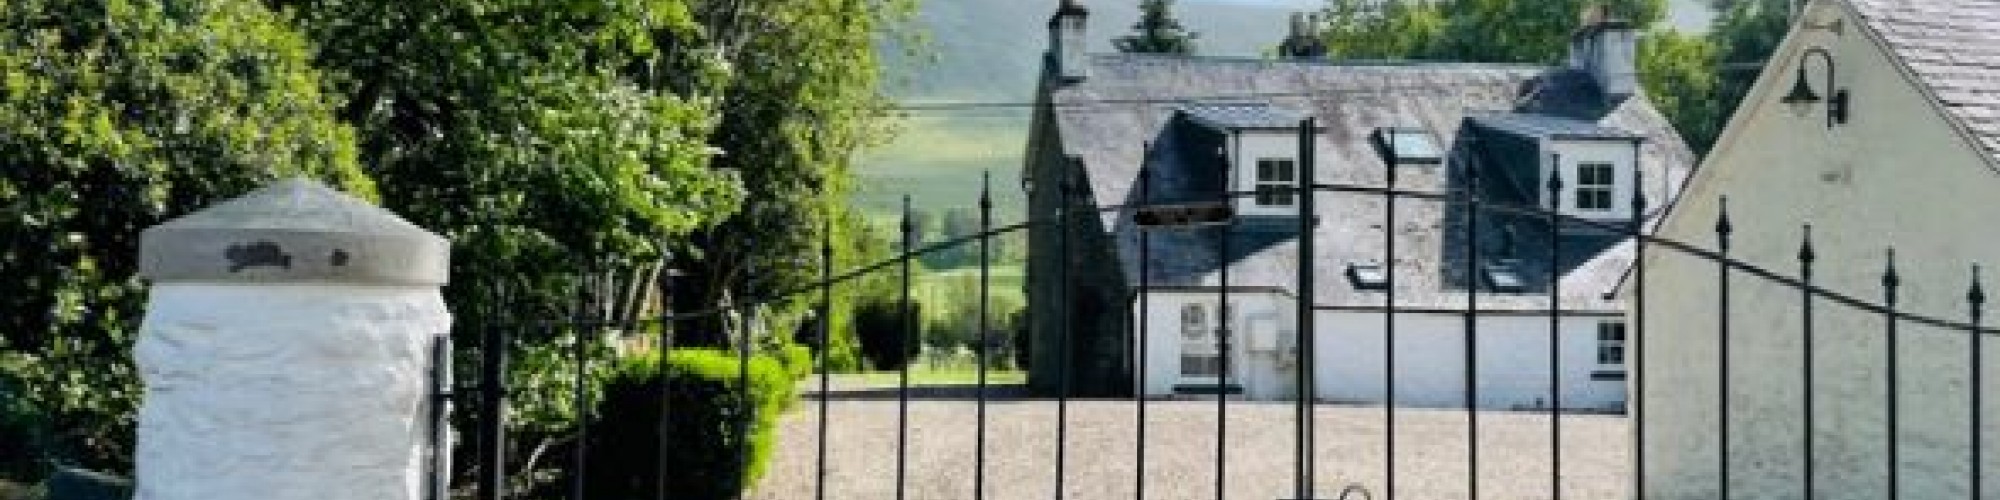 Accommodation The Old Manse Luxury 5 bedroom house with hot tub Entrance